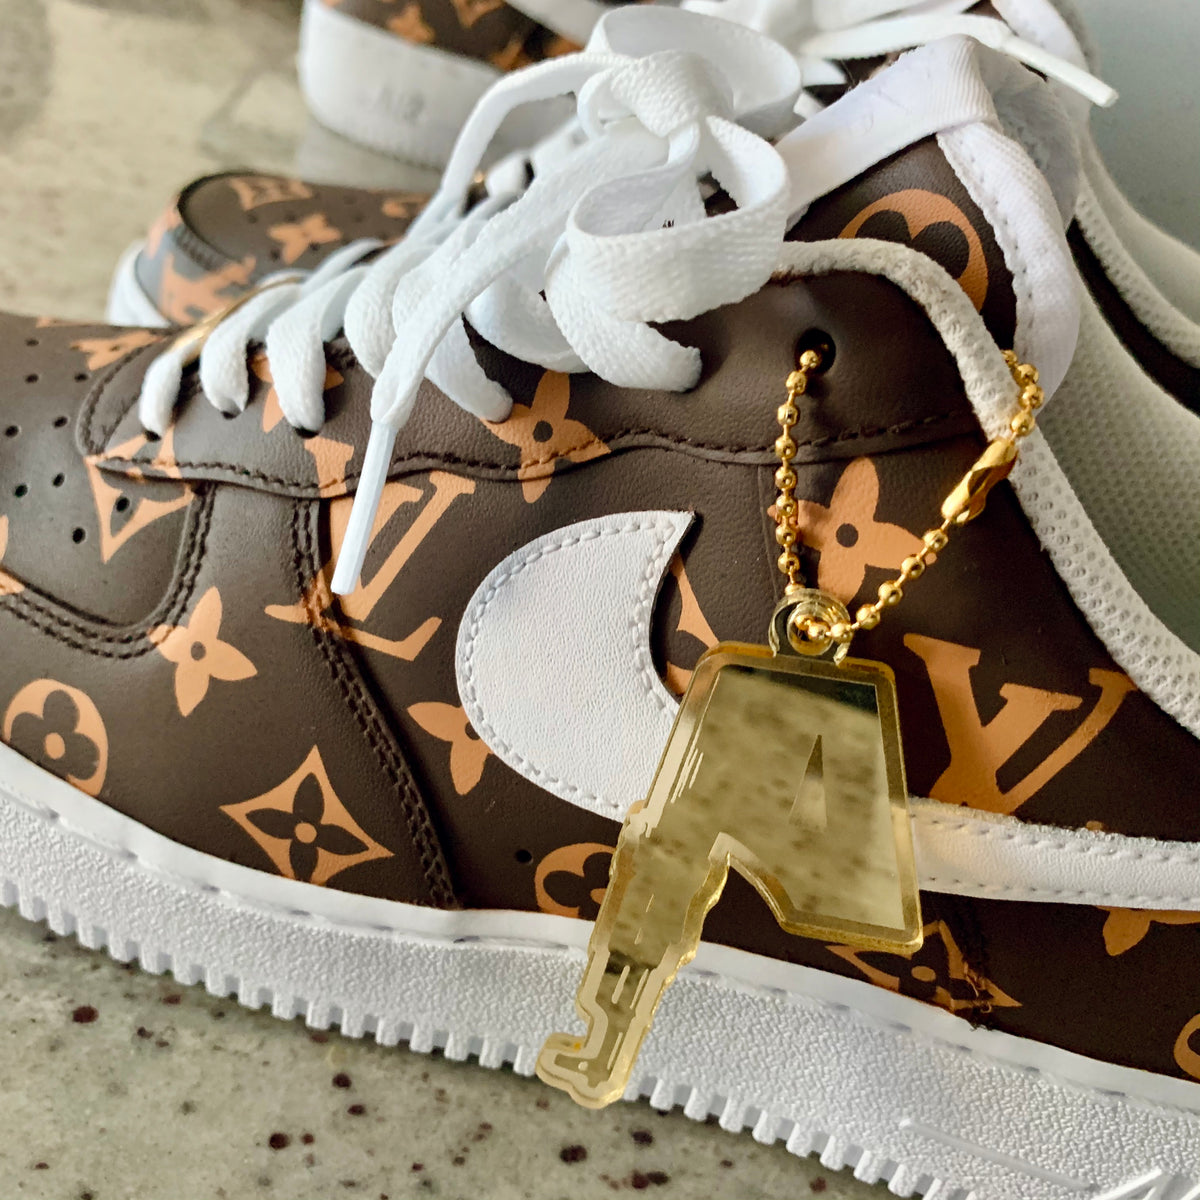 lv nike air force 1 gold